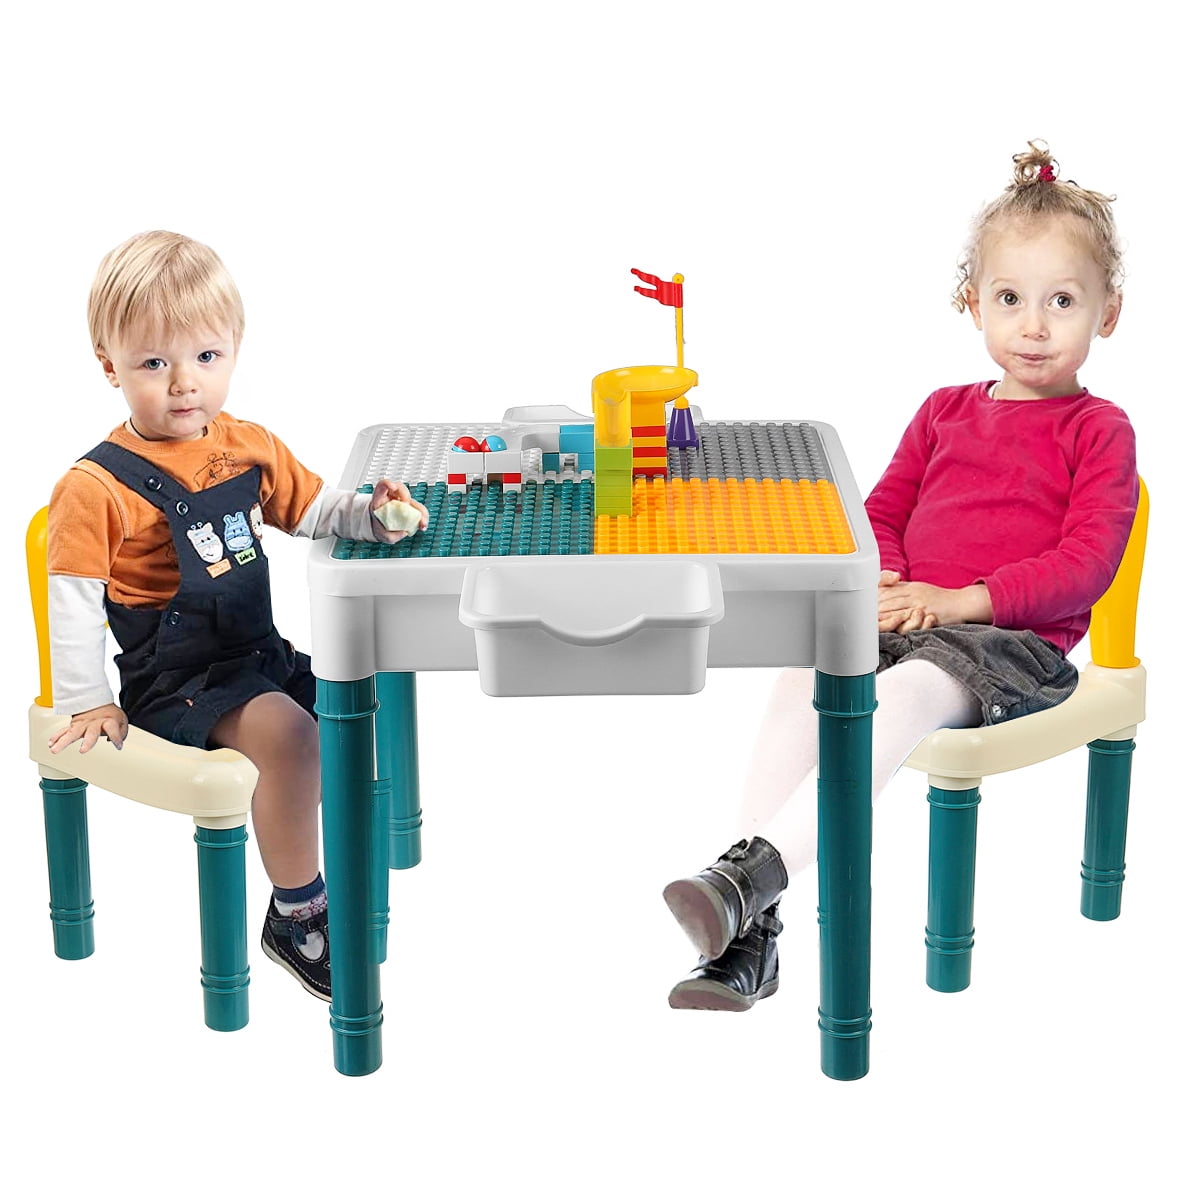 Building Blocks Desk/Table with Storage Elk and Friends Kids/Toddler Multi Activity Table with 2 Chairs Craft Play Table Plus Paper Roll Sensory Table